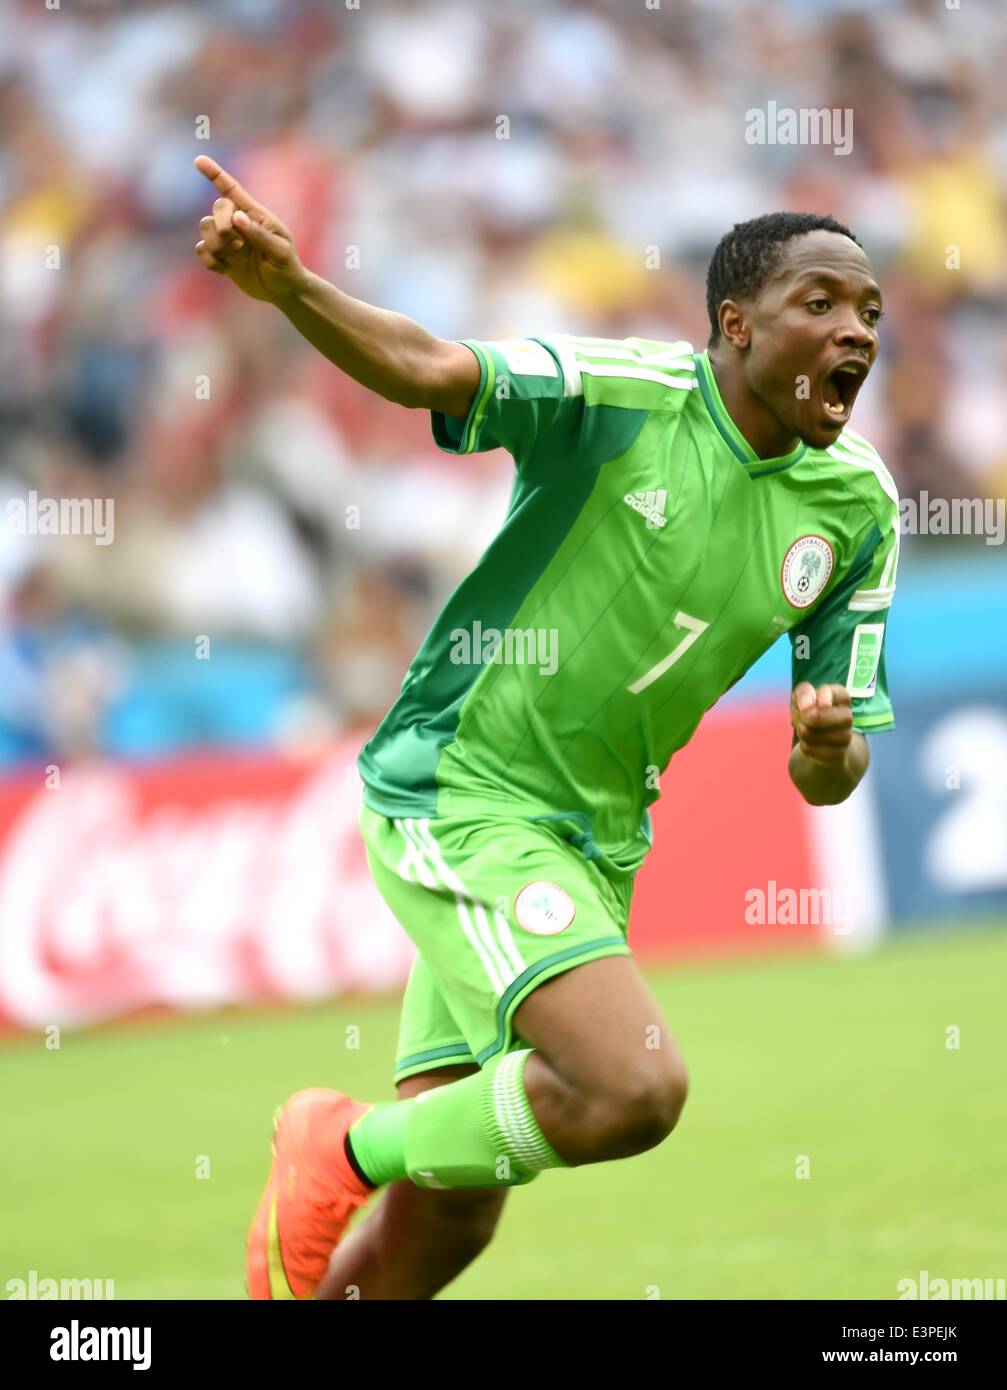 Porto Alegre, Brazil. 25th June, 2014. Nigeria's Ahmed Musa celebrates for scoring his second goal during a Group F match between Nigeria and Argentina of 2014 FIFA World Cup at the Estadio Beira-Rio Stadium in Porto Alegre, Brazil, on June 25, 2014. © Li Ga/Xinhua/Alamy Live News Stock Photo